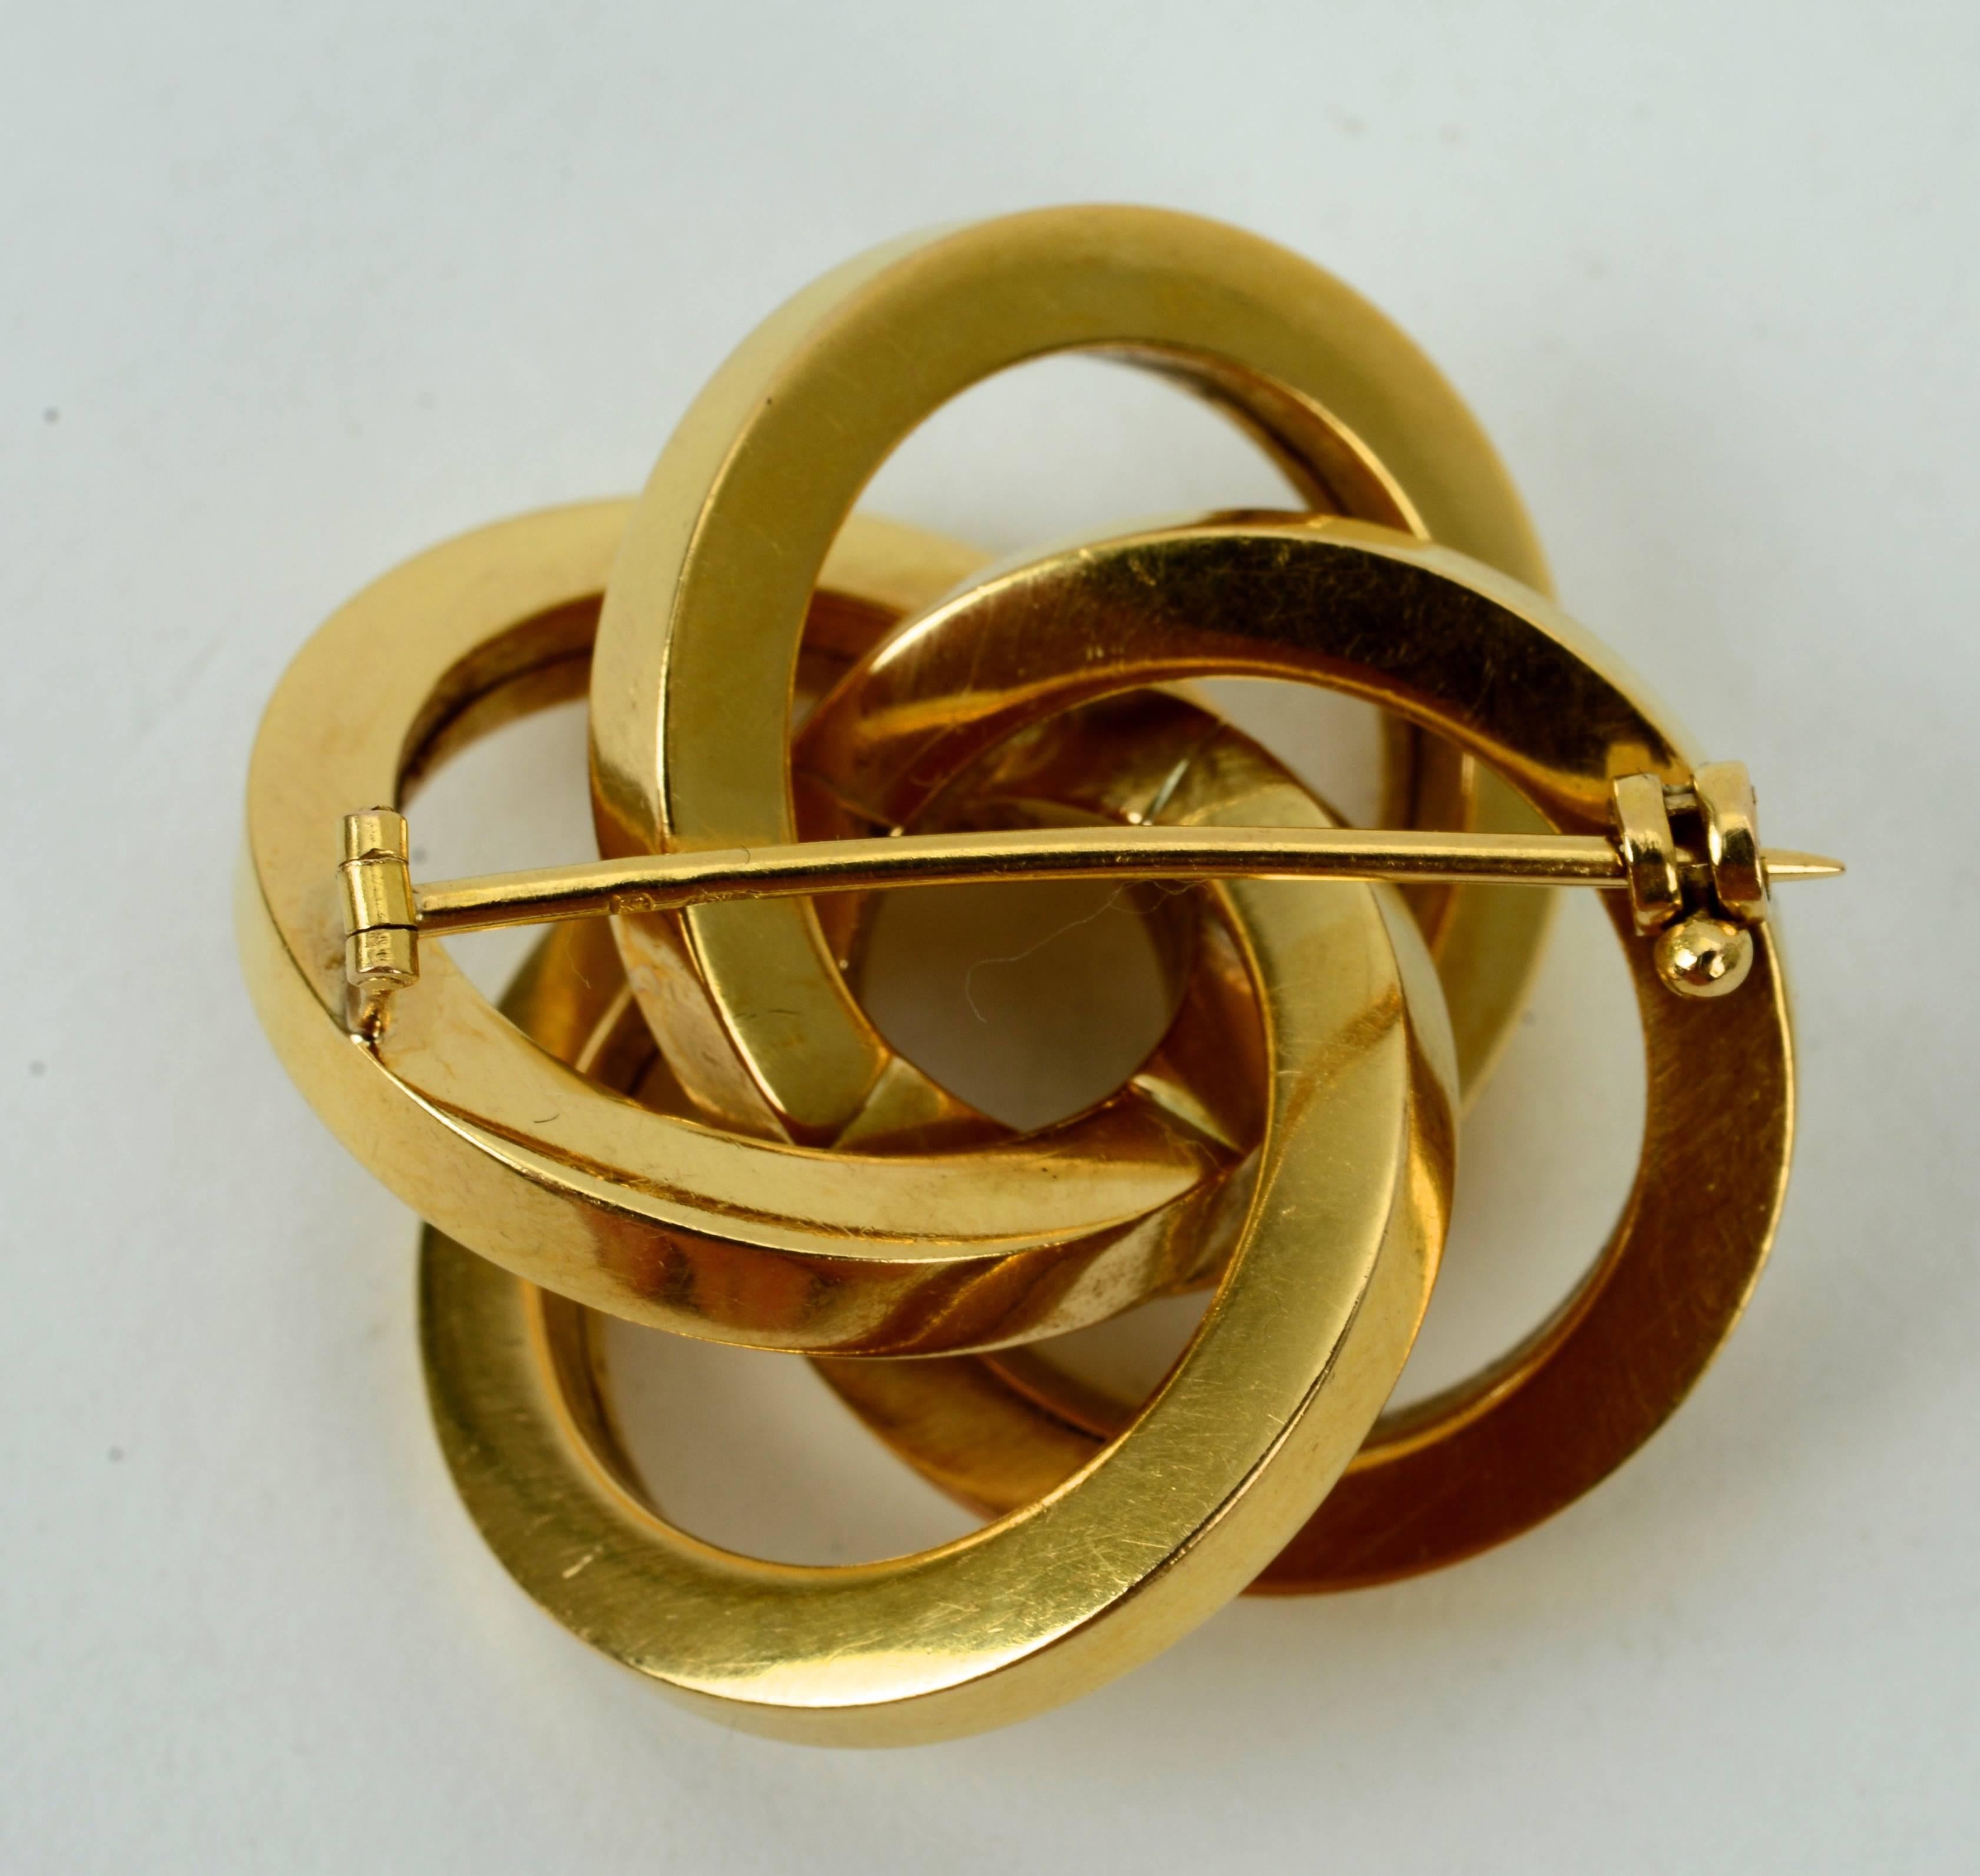 This Rare, Elaborate Portuguese Lover's Knot Pin is Mid 20th C, 19.2K Gold. The Portuguese used a 